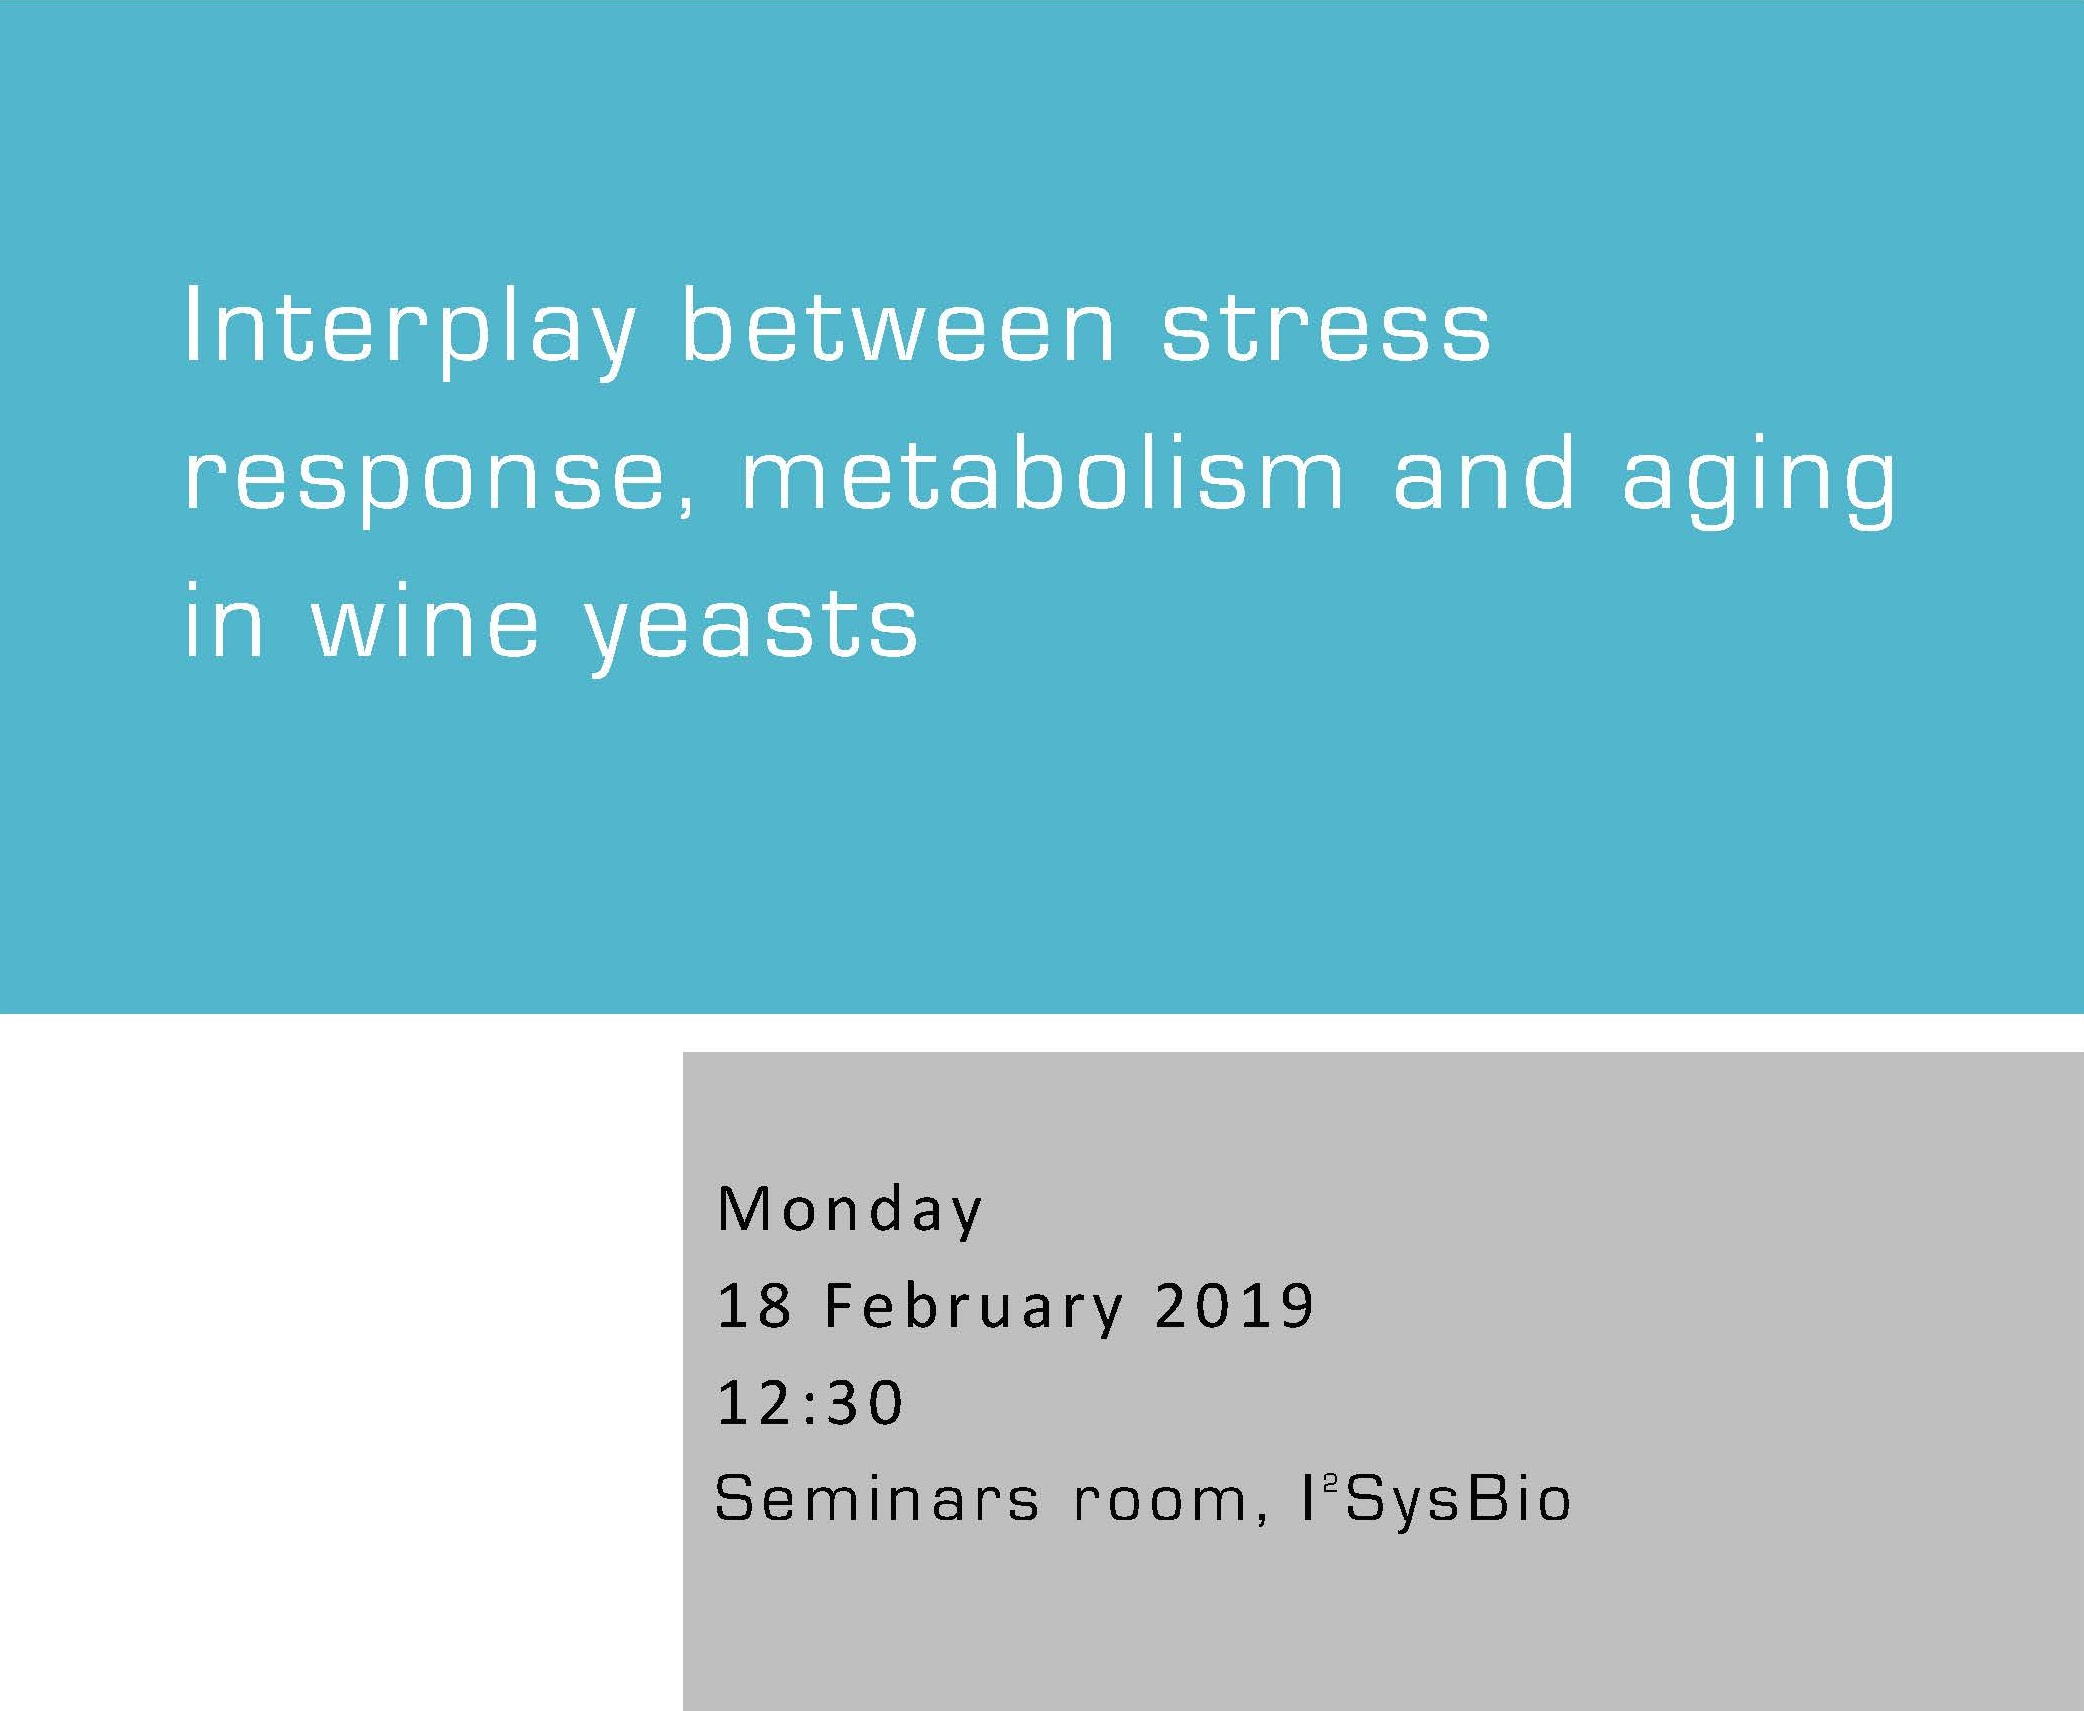 Interplay between stress response, metabolism and aging in wine yeasts